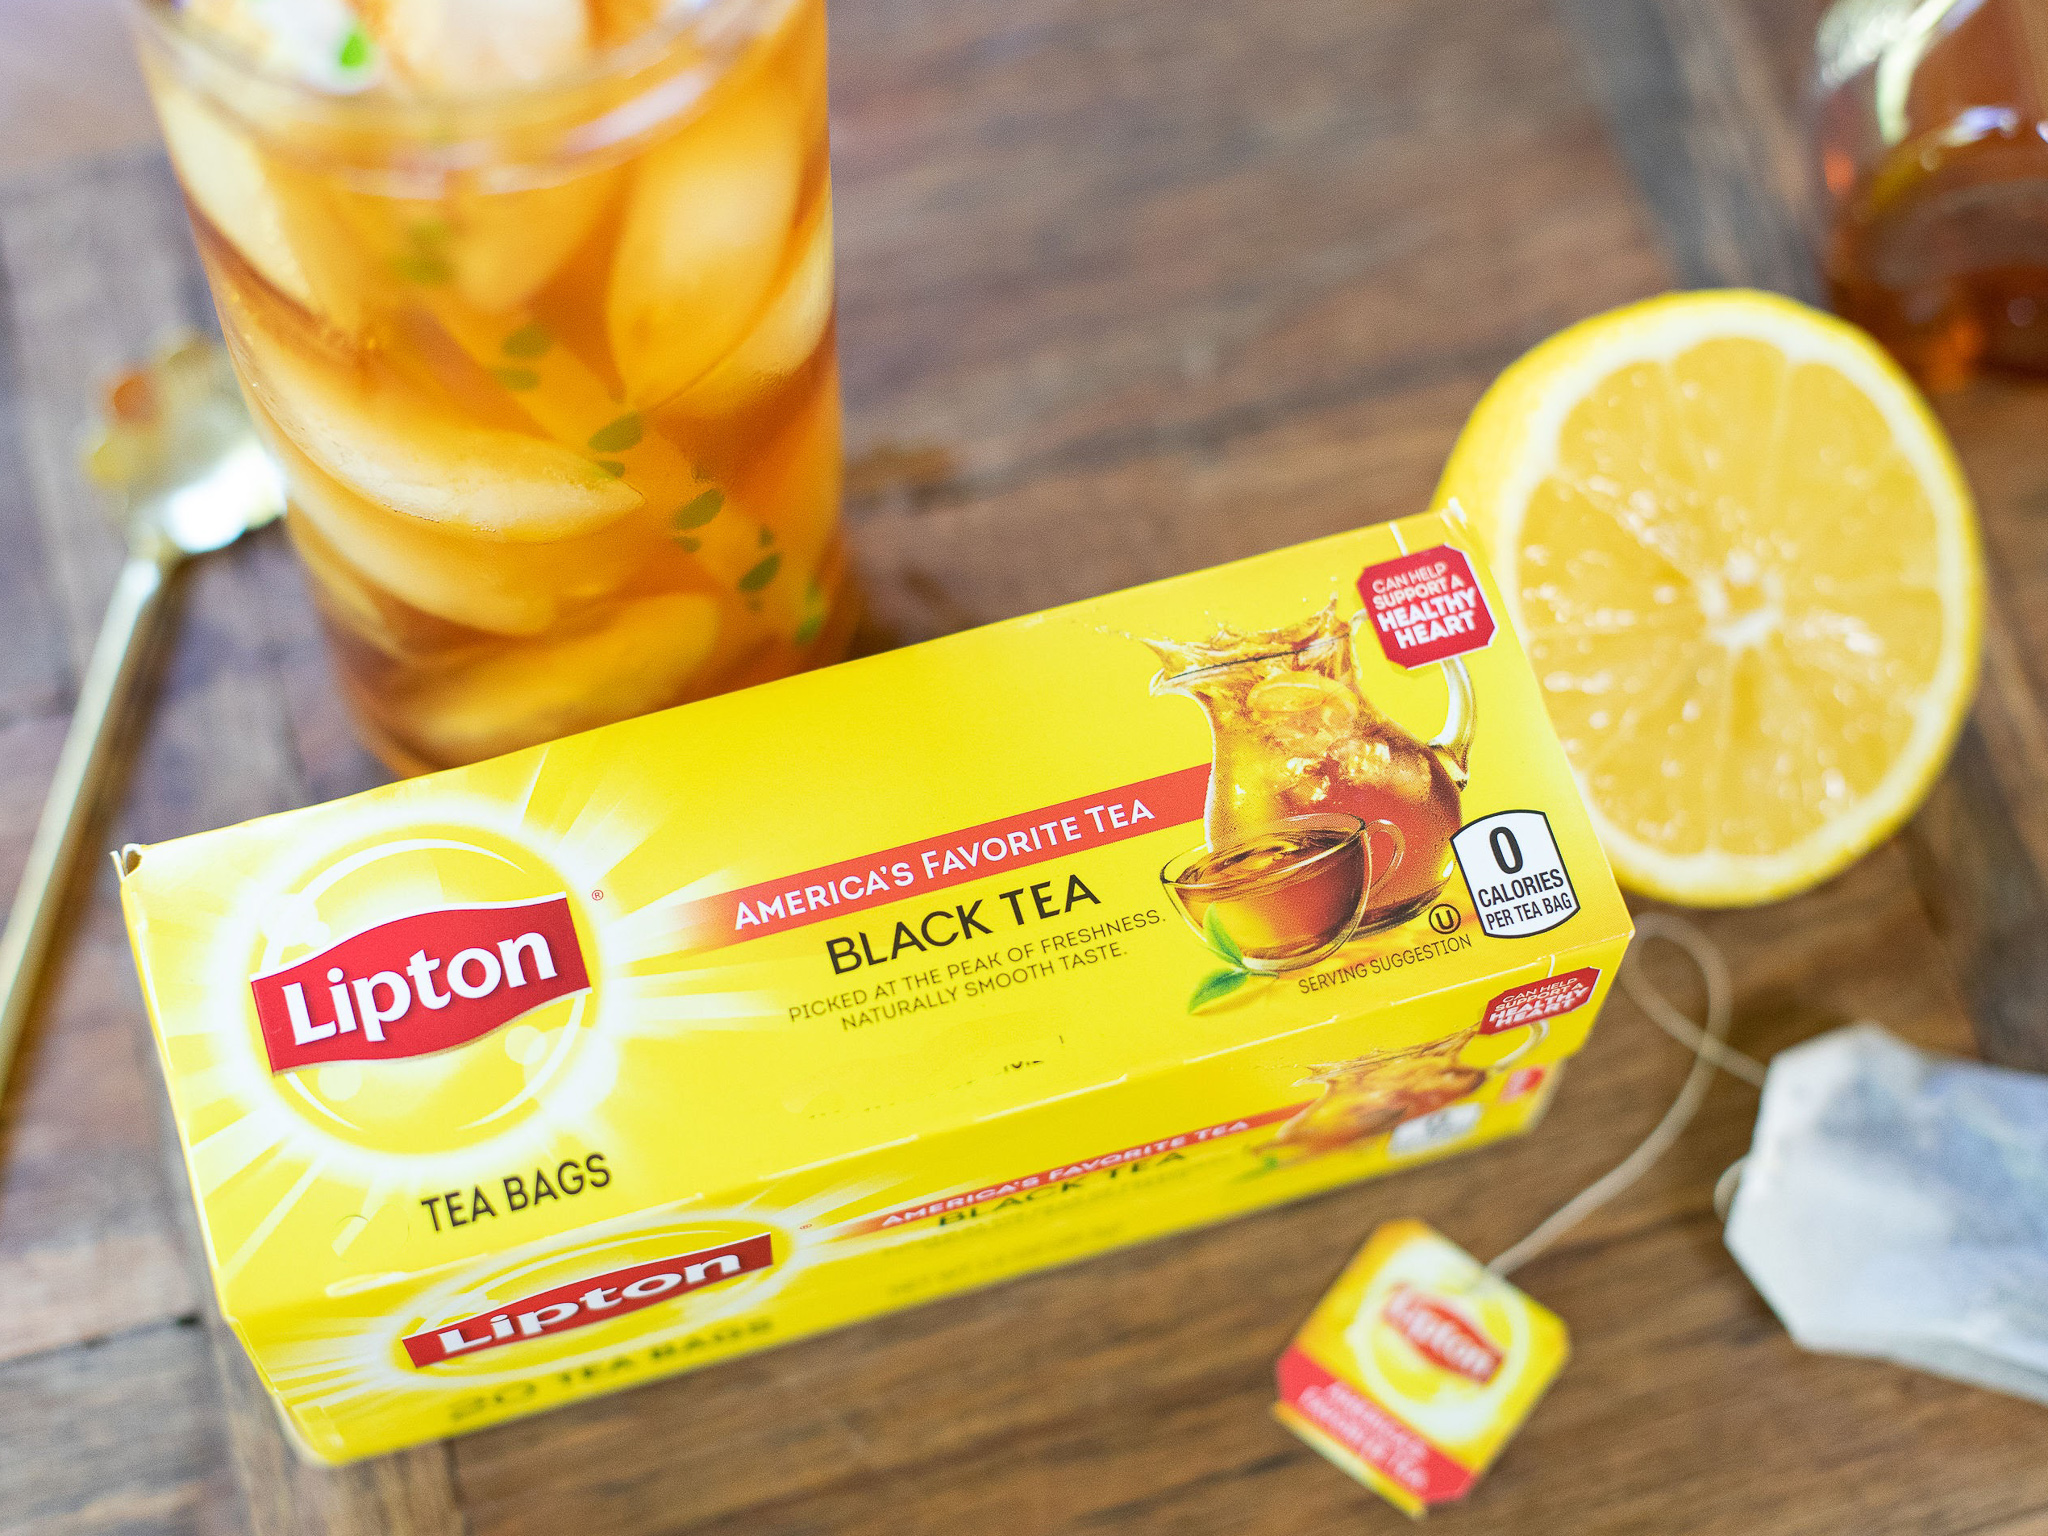 Grab Lipton Tea Bags For As Low As $1.30 At Publix